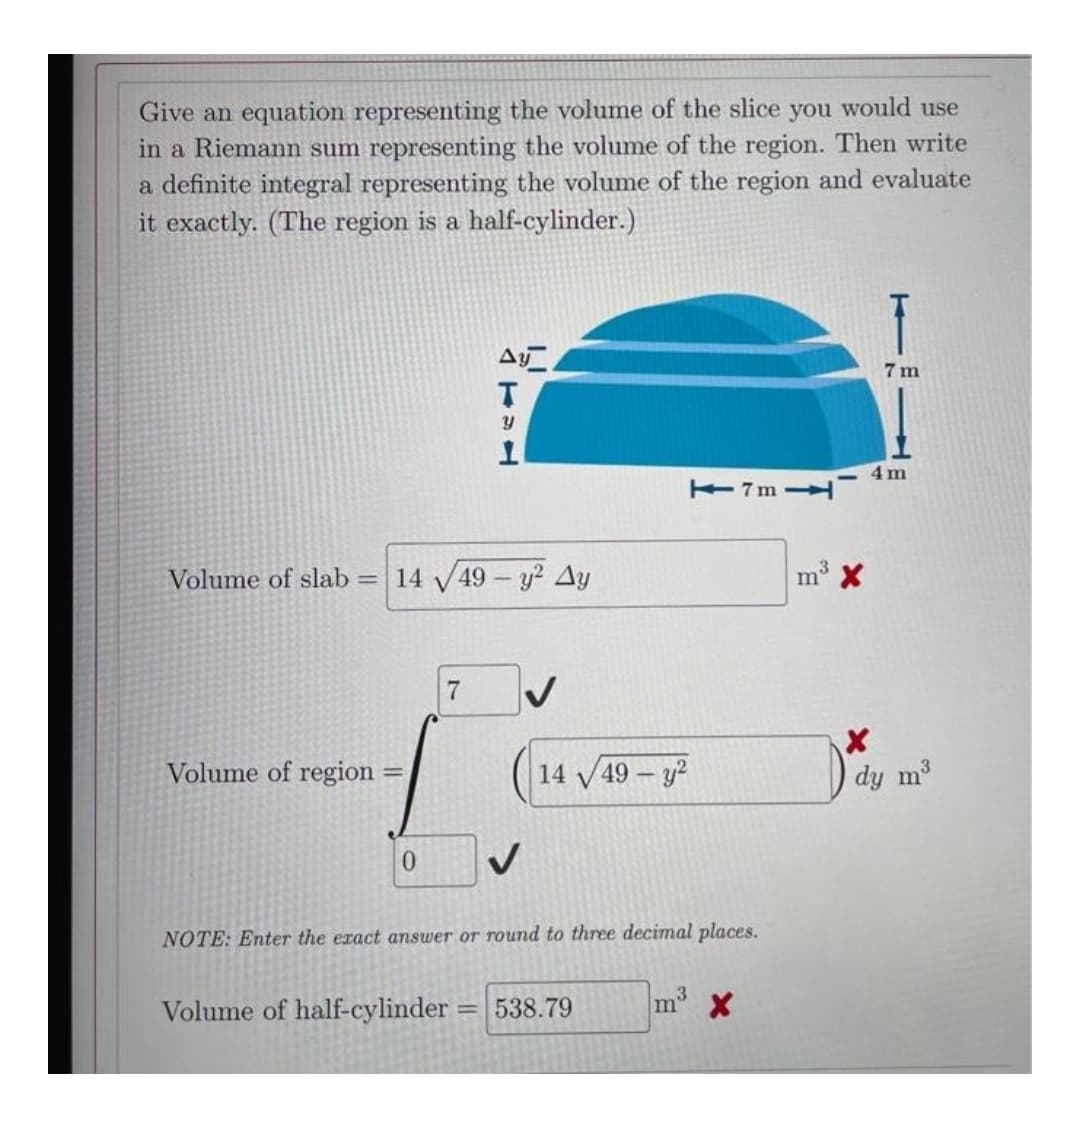 Give an equation representing the volume of the slice you would use
in a Riemann sum representing the volume of the region. Then write
a definite integral representing the volume of the region and evaluate
it exactly. (The region is a half-cylinder.)
7 m
E7m H
Volume of slab = 14 49 - y? Ay
m X
Volume of region
14 V49 – y?
dy m3
0.
NOTE: Enter the eract answer or round to three decimal places.
Volume of half-cylinder = 538.79
m X
%3D
